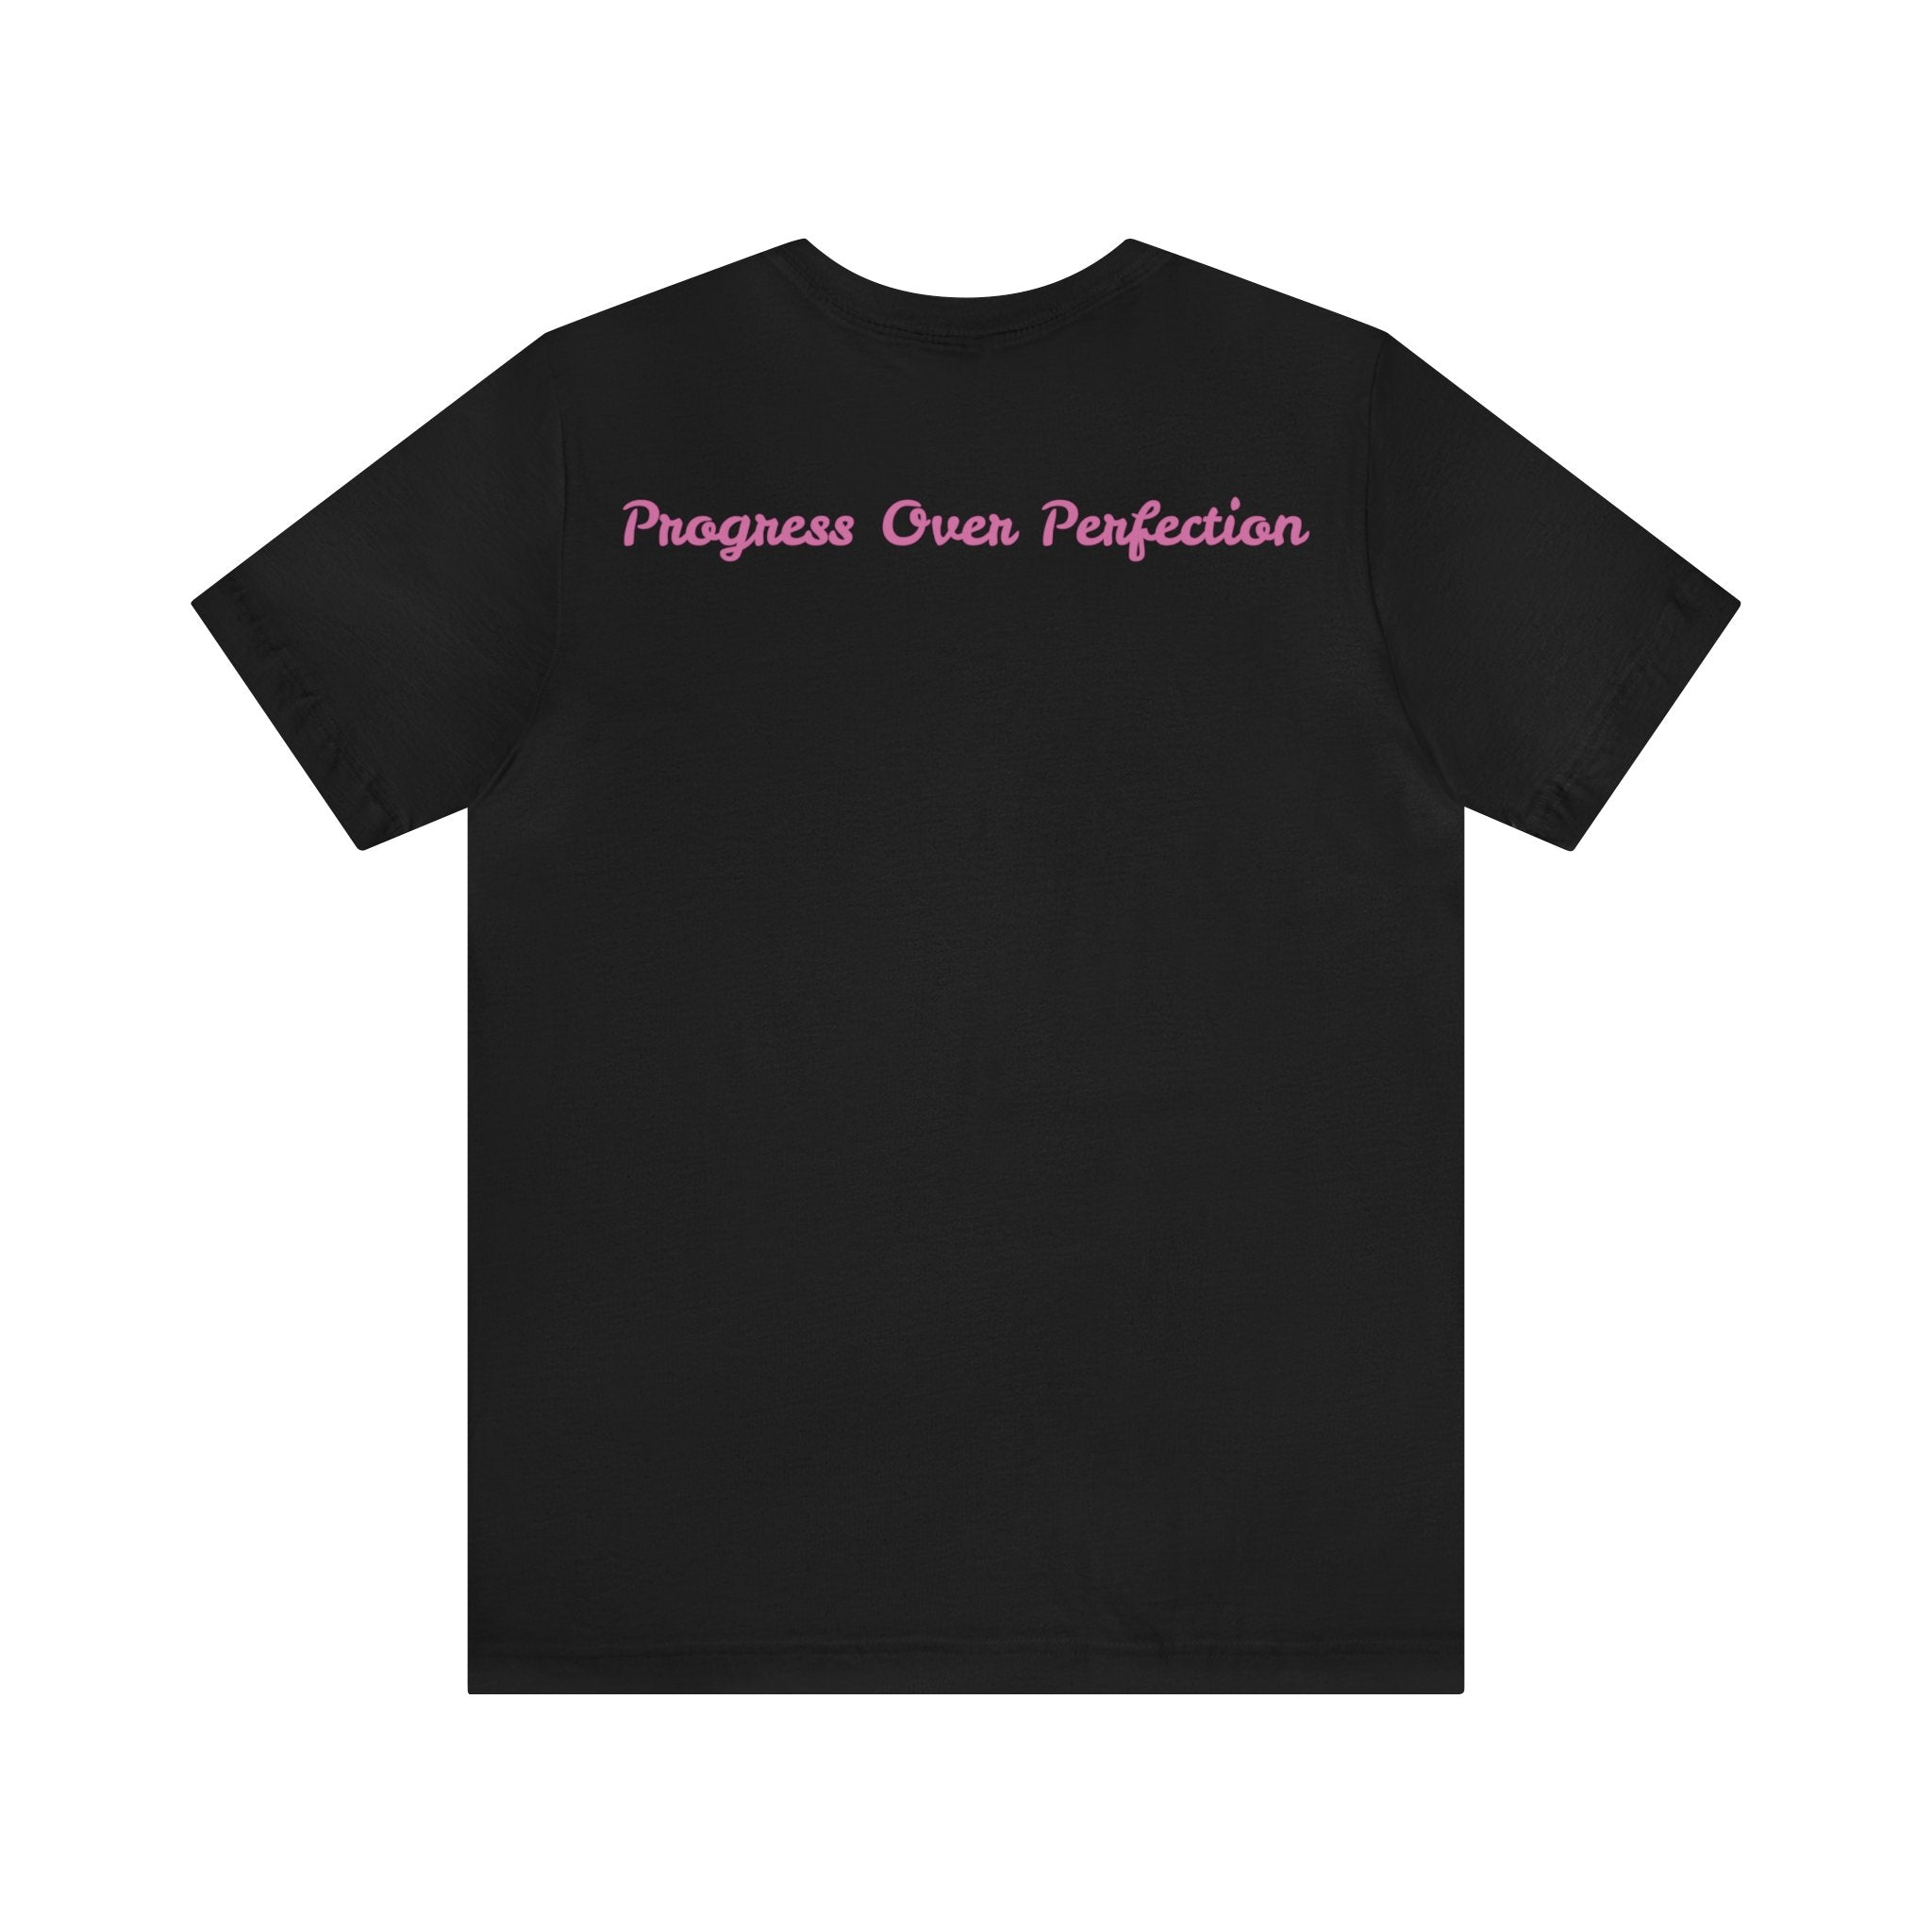 Progress Over Perfection Tee - Bella+Canvas 3001 Yellow Airlume Cotton Bella+Canvas 3001 Crew Neckline Jersey Short Sleeve Lightweight Fabric Mental Health Support Retail Fit Tear-away Label Tee Unisex Tee T-Shirt 7225300749627422989_2048 Printify